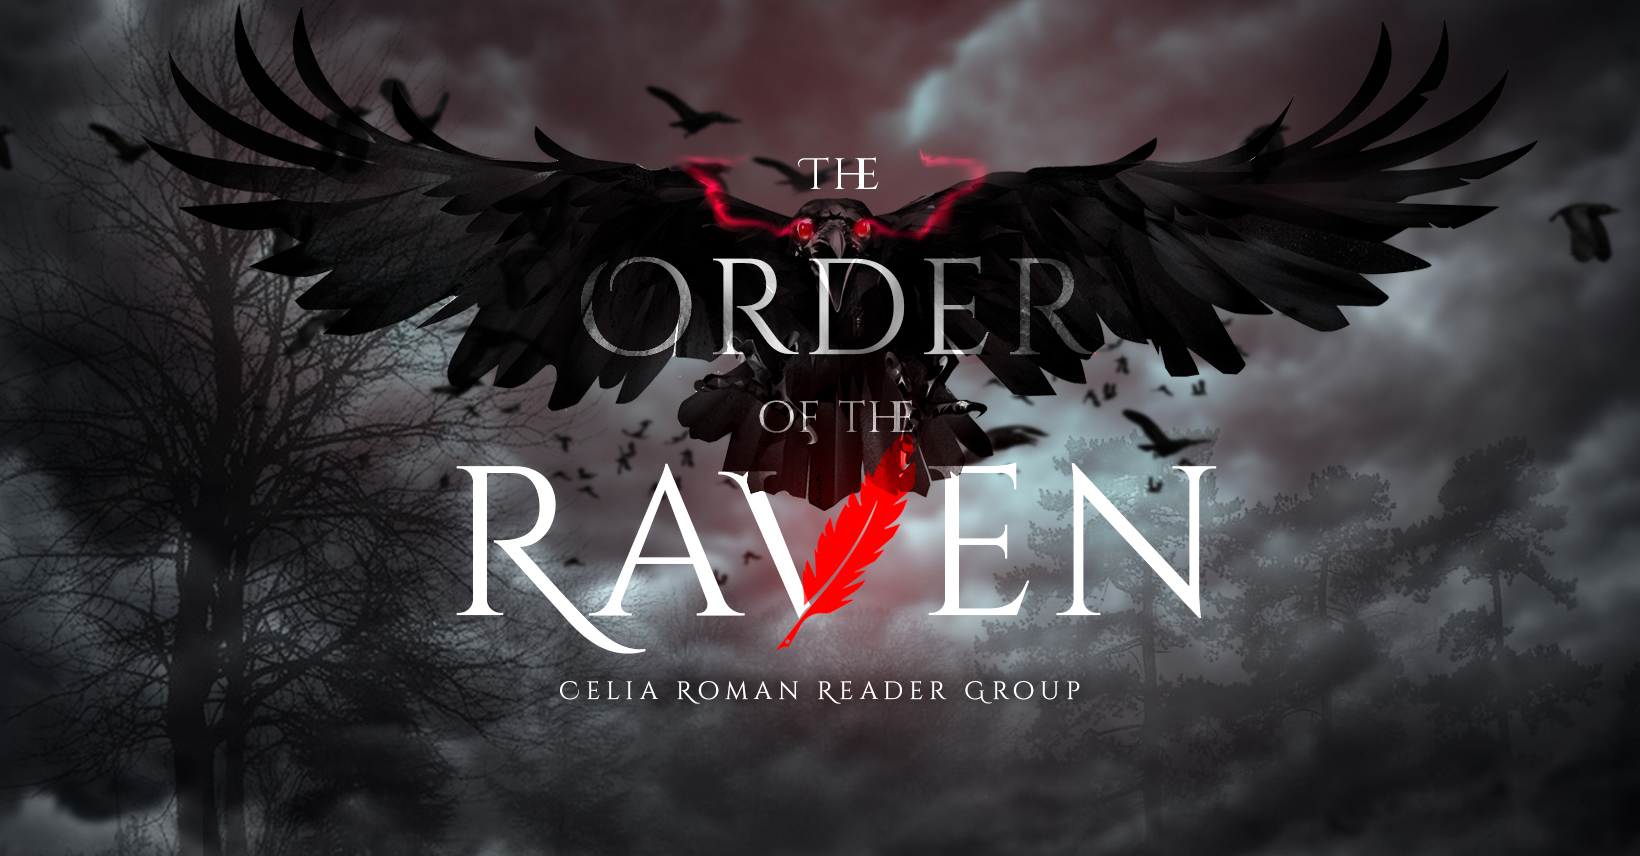 The Order of the Raven, Celia Roman Reader Group